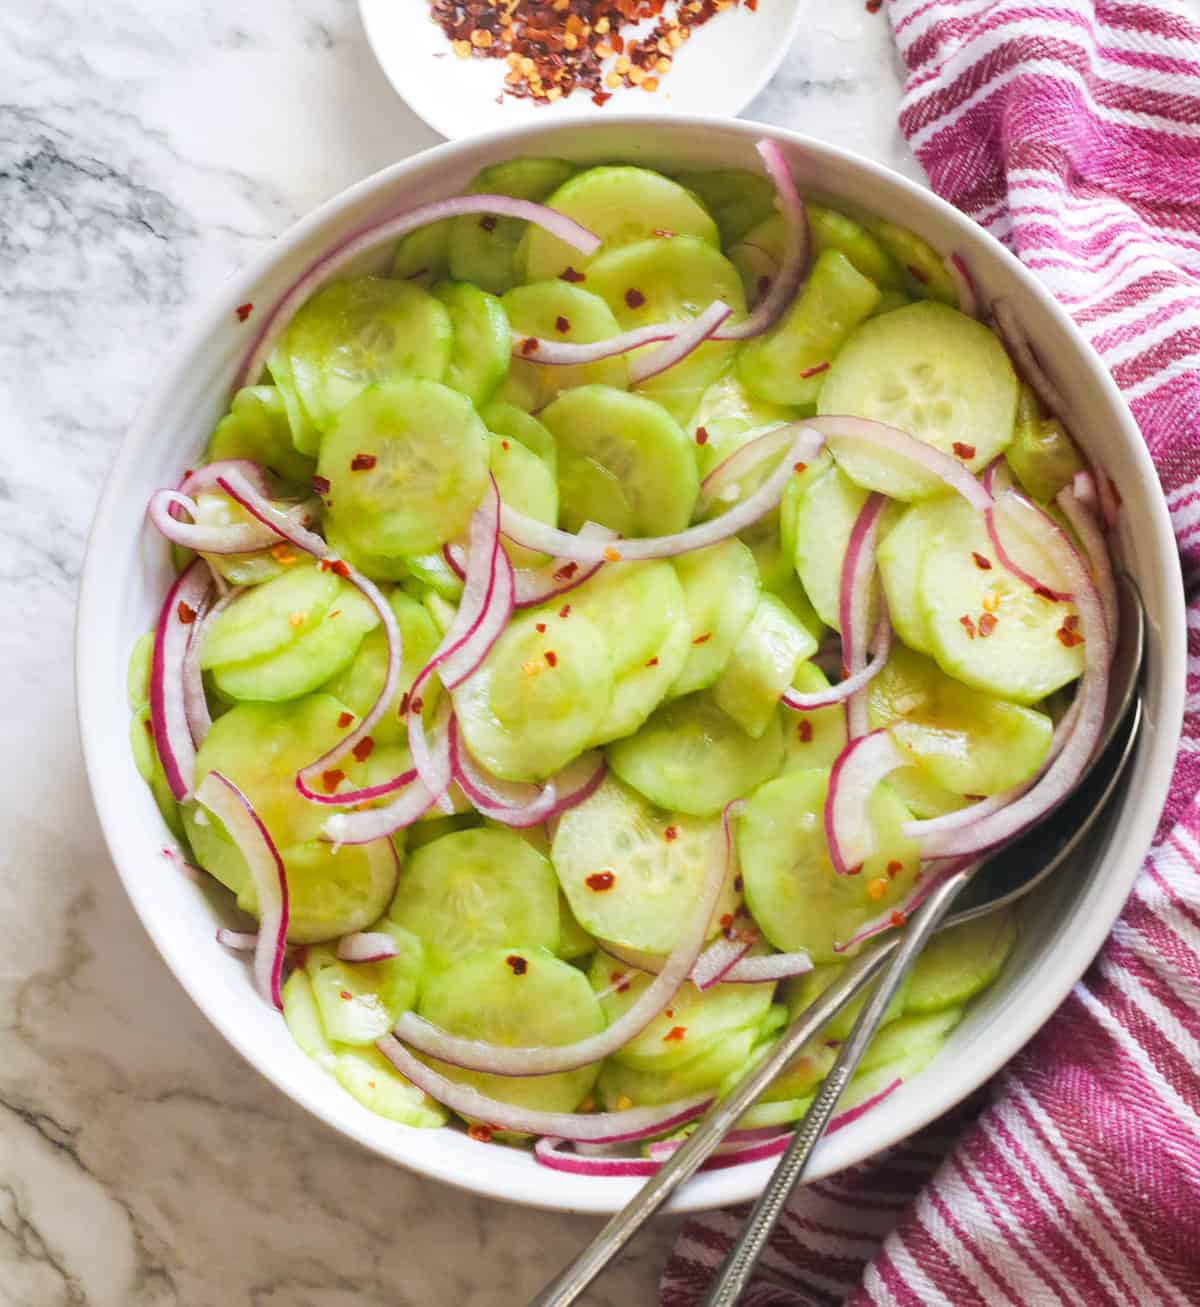 Cucumber and onion salad in a white bowl.